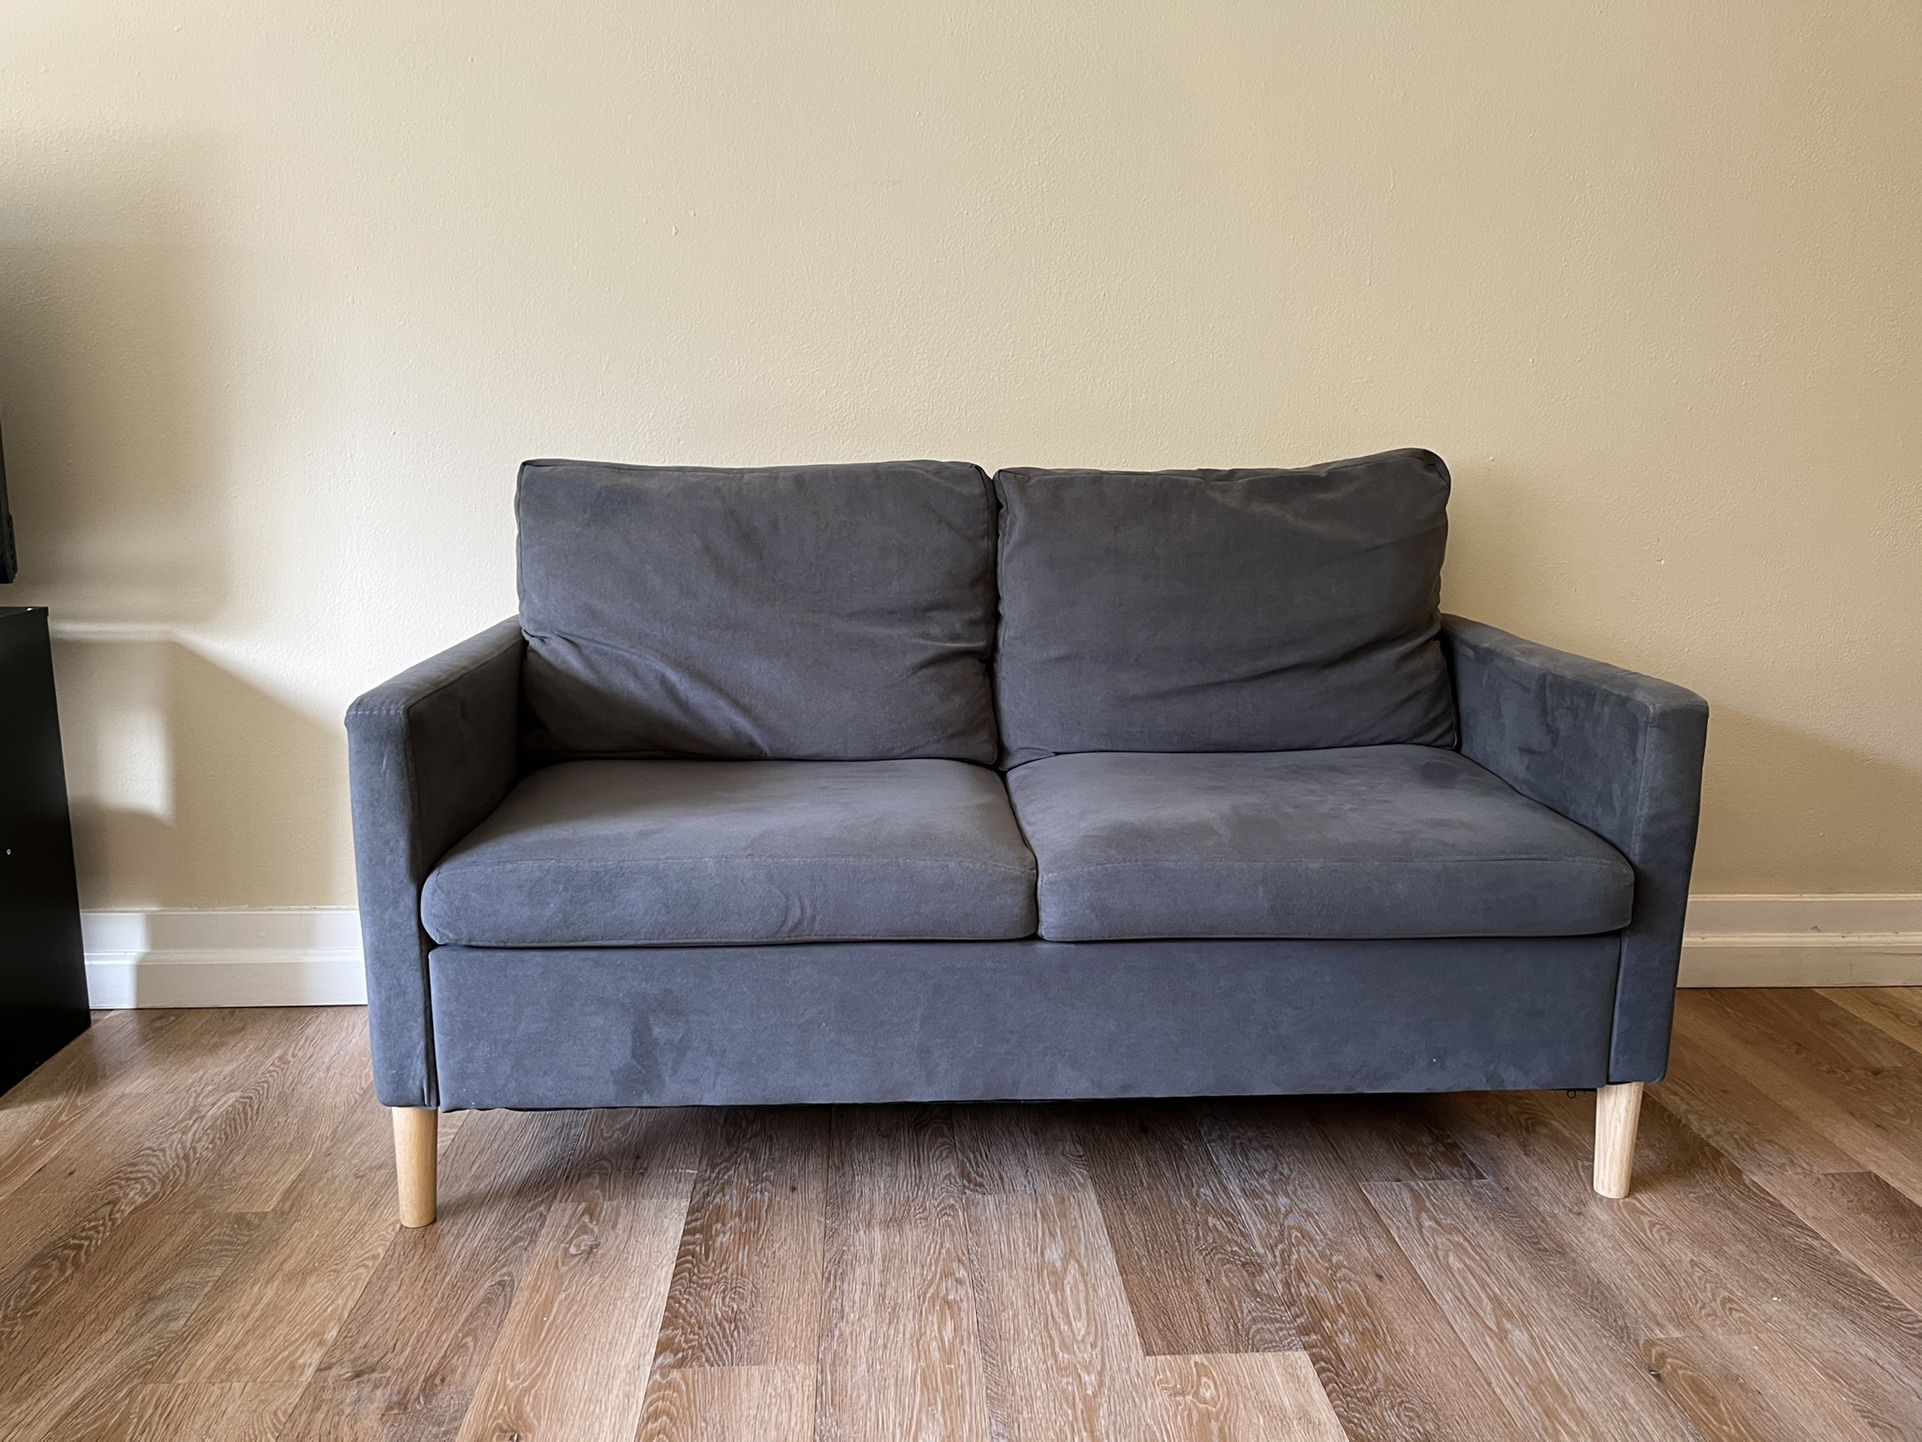 Small Sofa For Sale